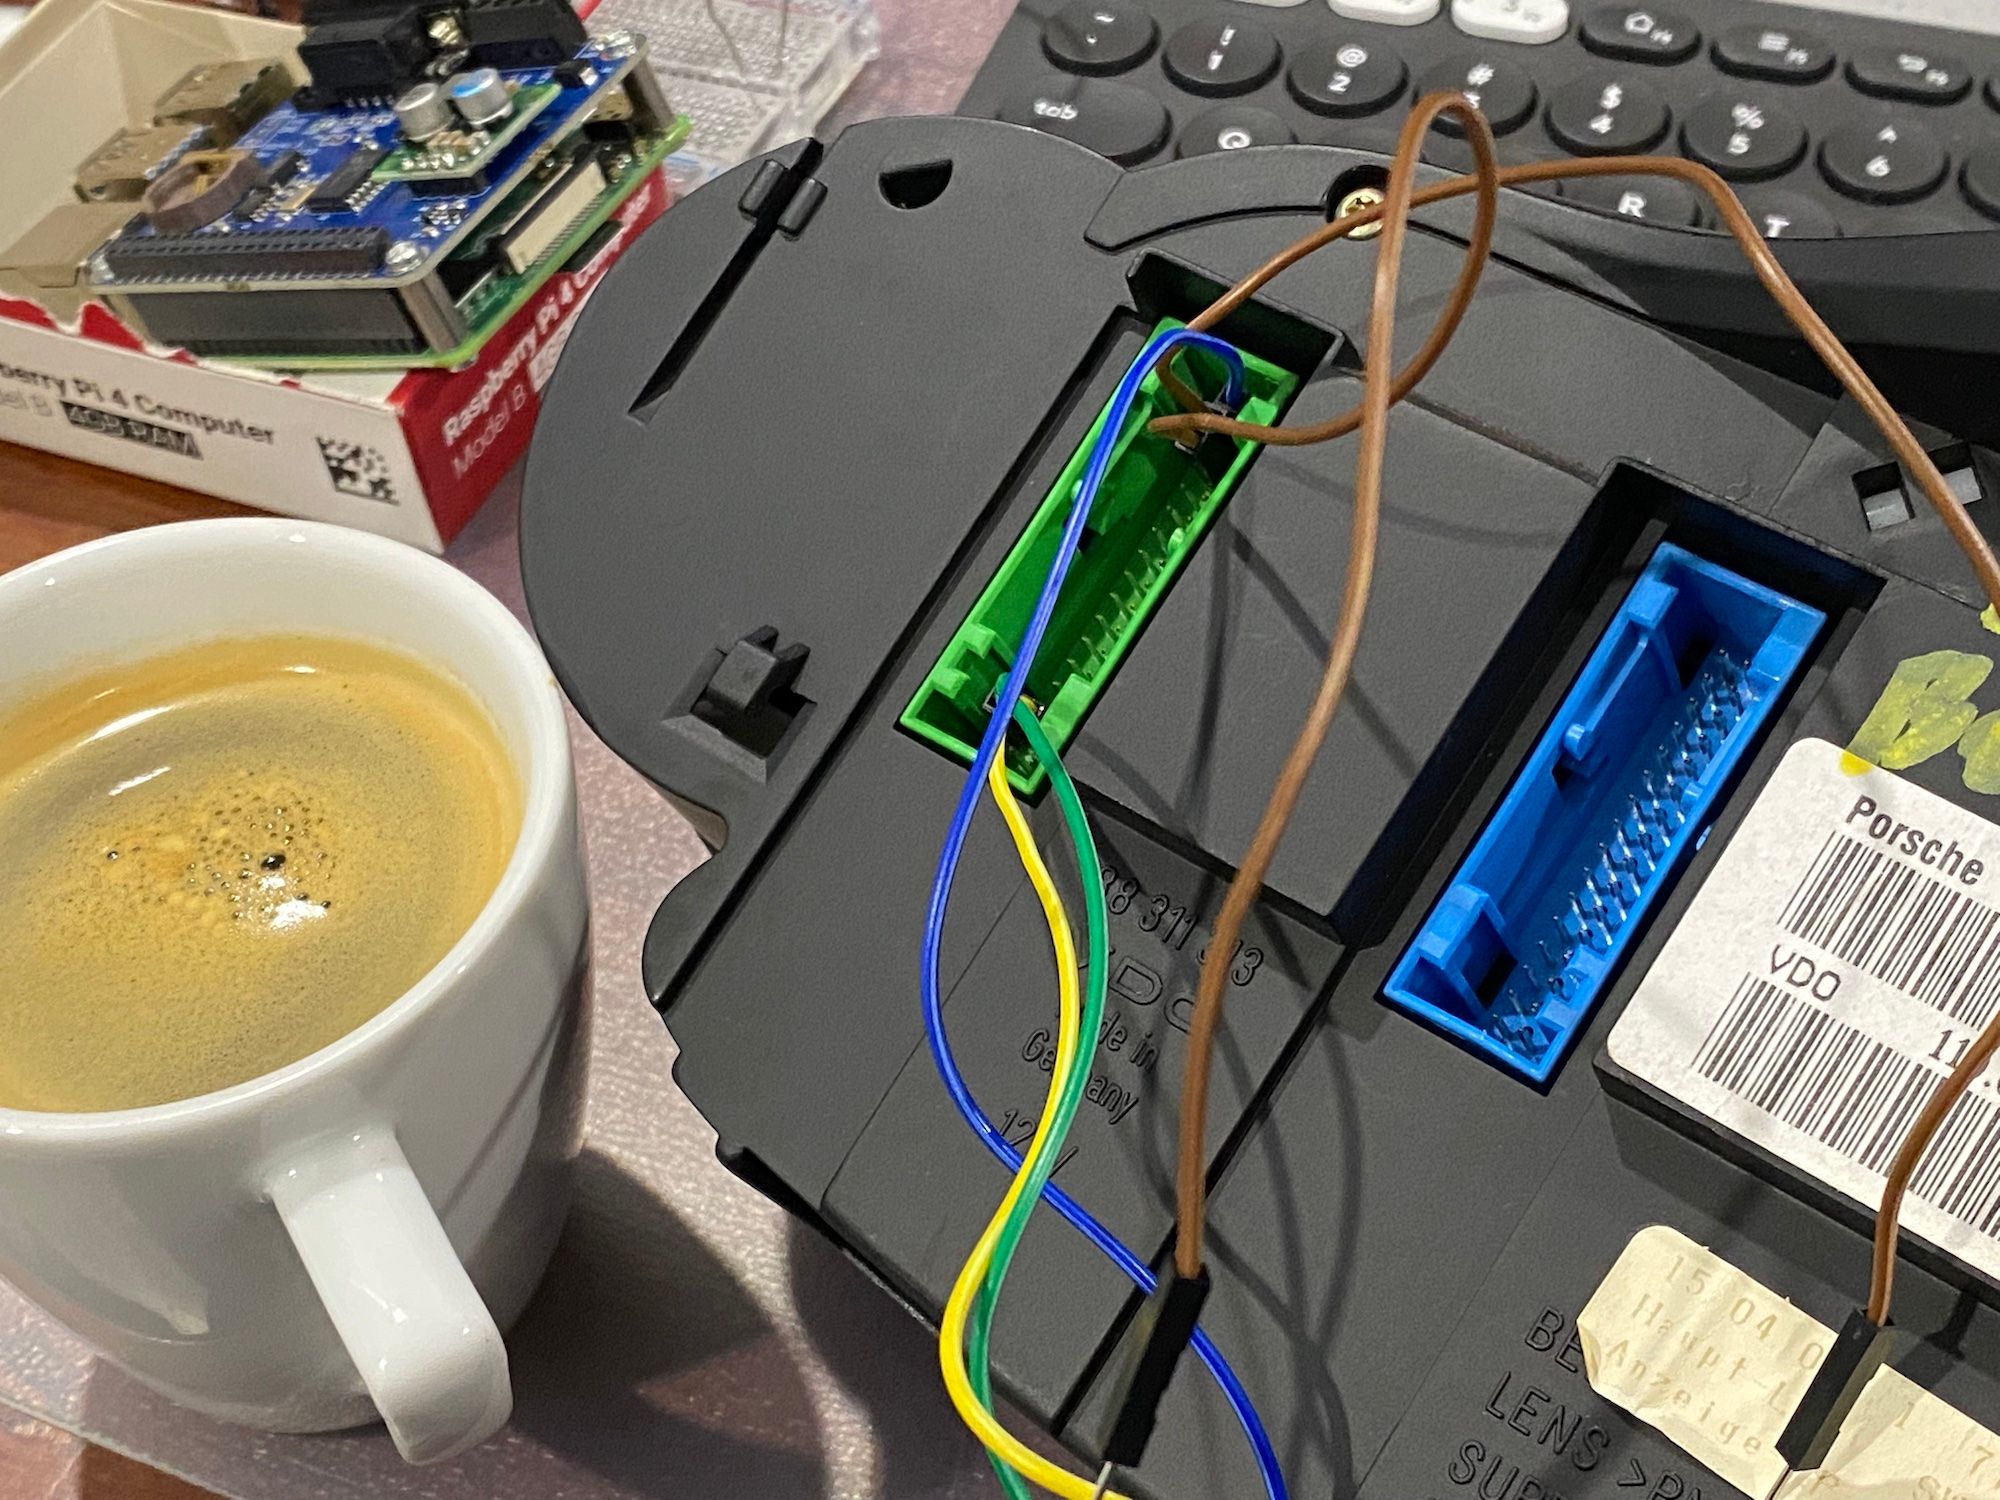 Raspberry Pi4 with PICAN3 hat, back of car instrument cluster with wires attached, keyboard and a coffee cup